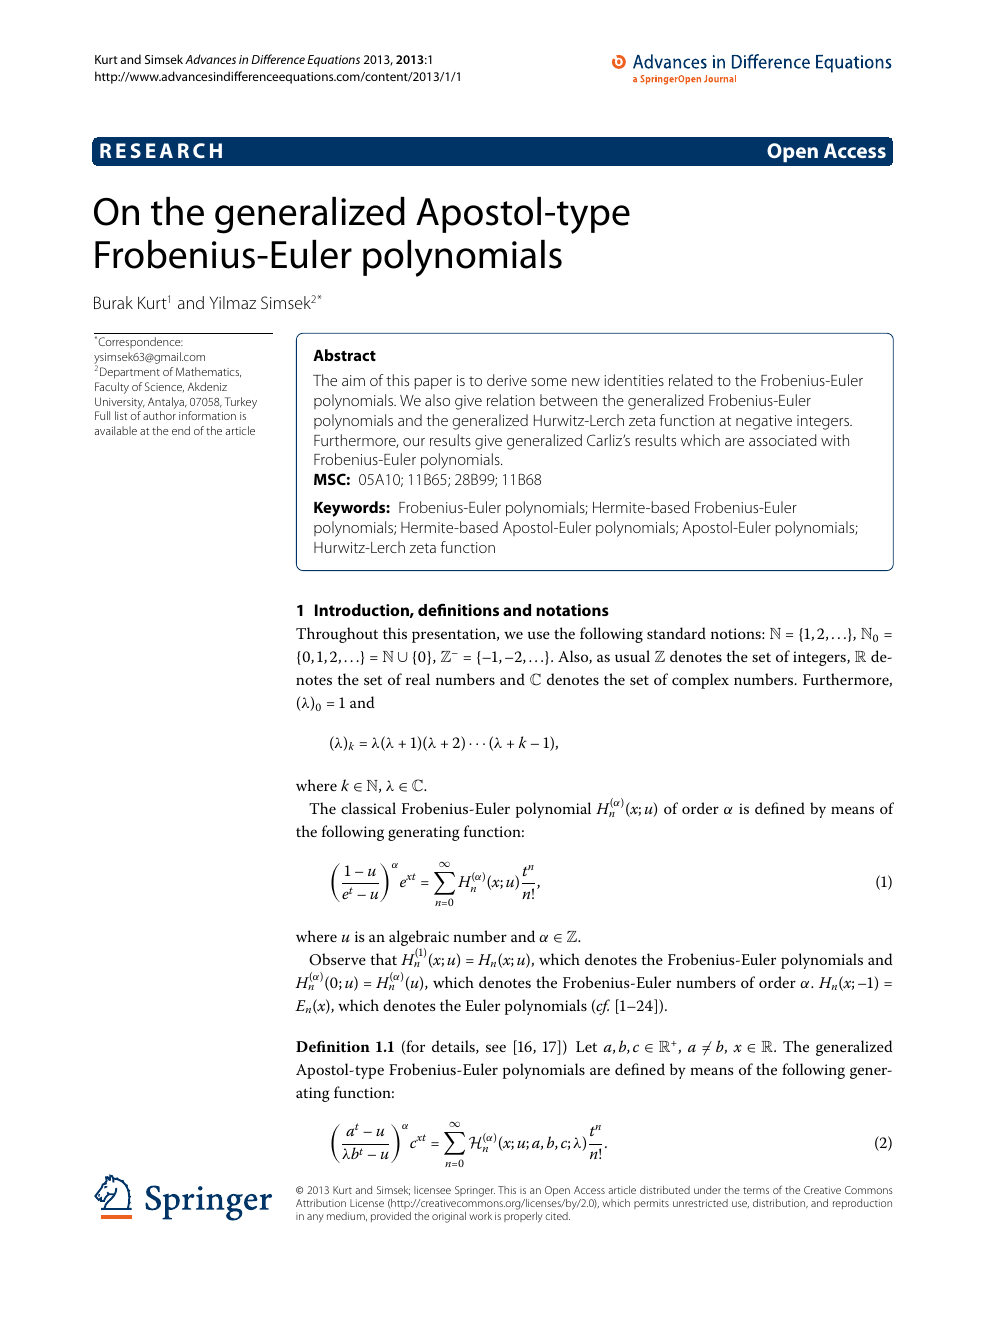 On The Generalized Apostol Type Frobenius Euler Polynomials Topic Of Research Paper In Mathematics Download Scholarly Article Pdf And Read For Free On Cyberleninka Open Science Hub